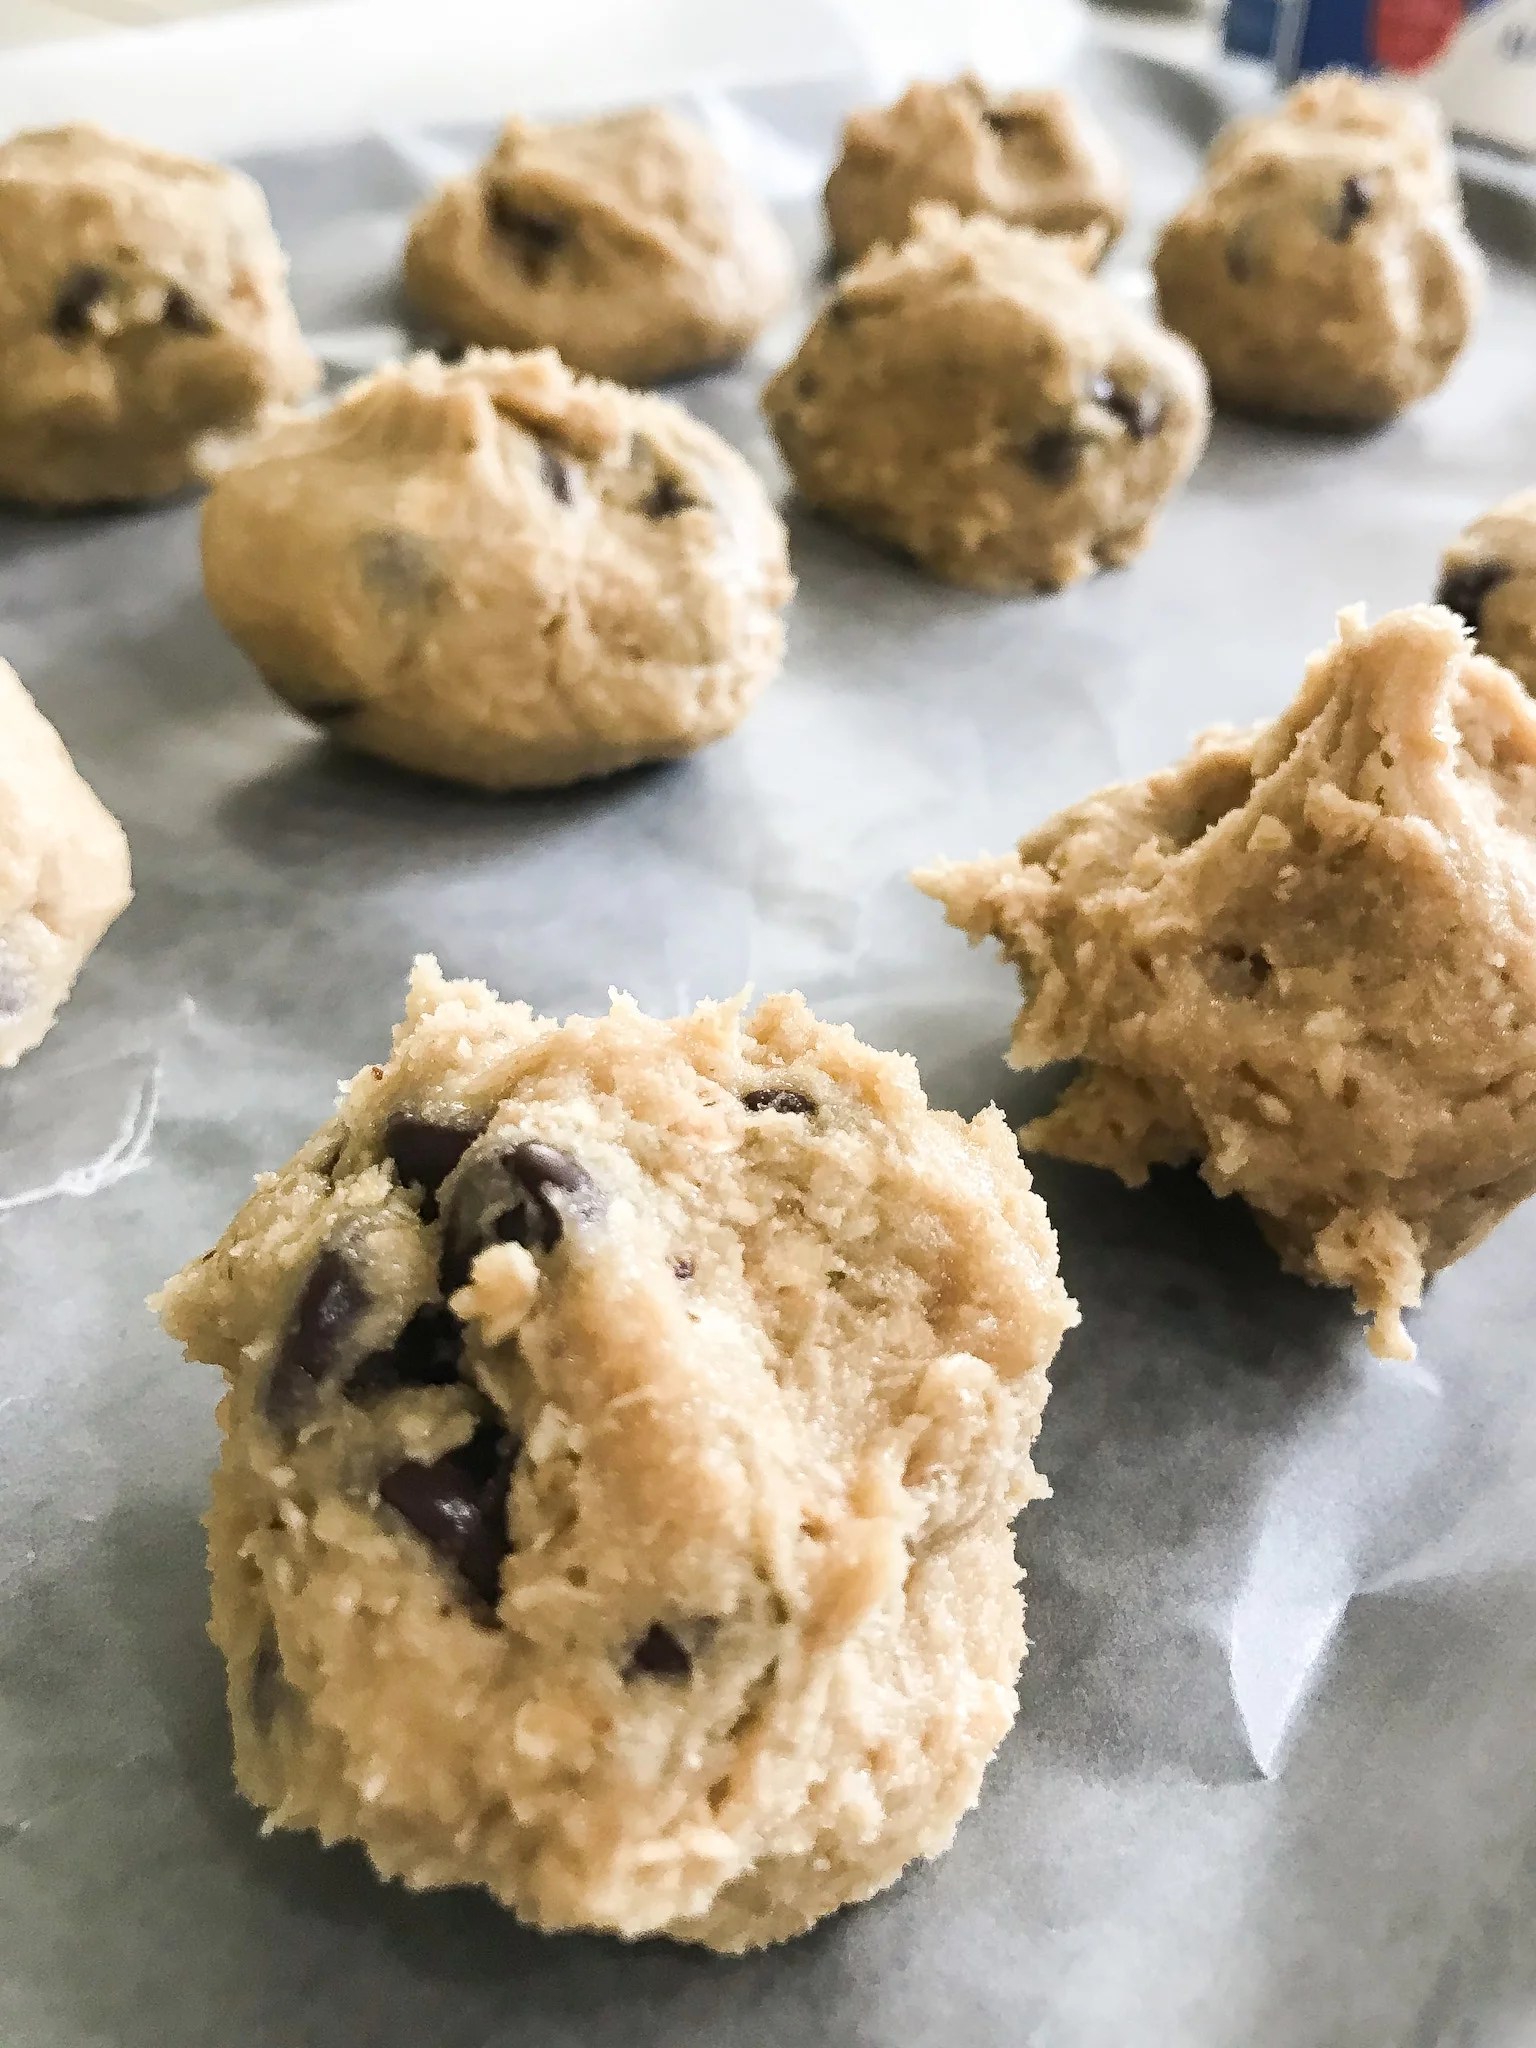 Joanna Gaines's Silo Cookie Recipe With Pictures POPSUGAR Food